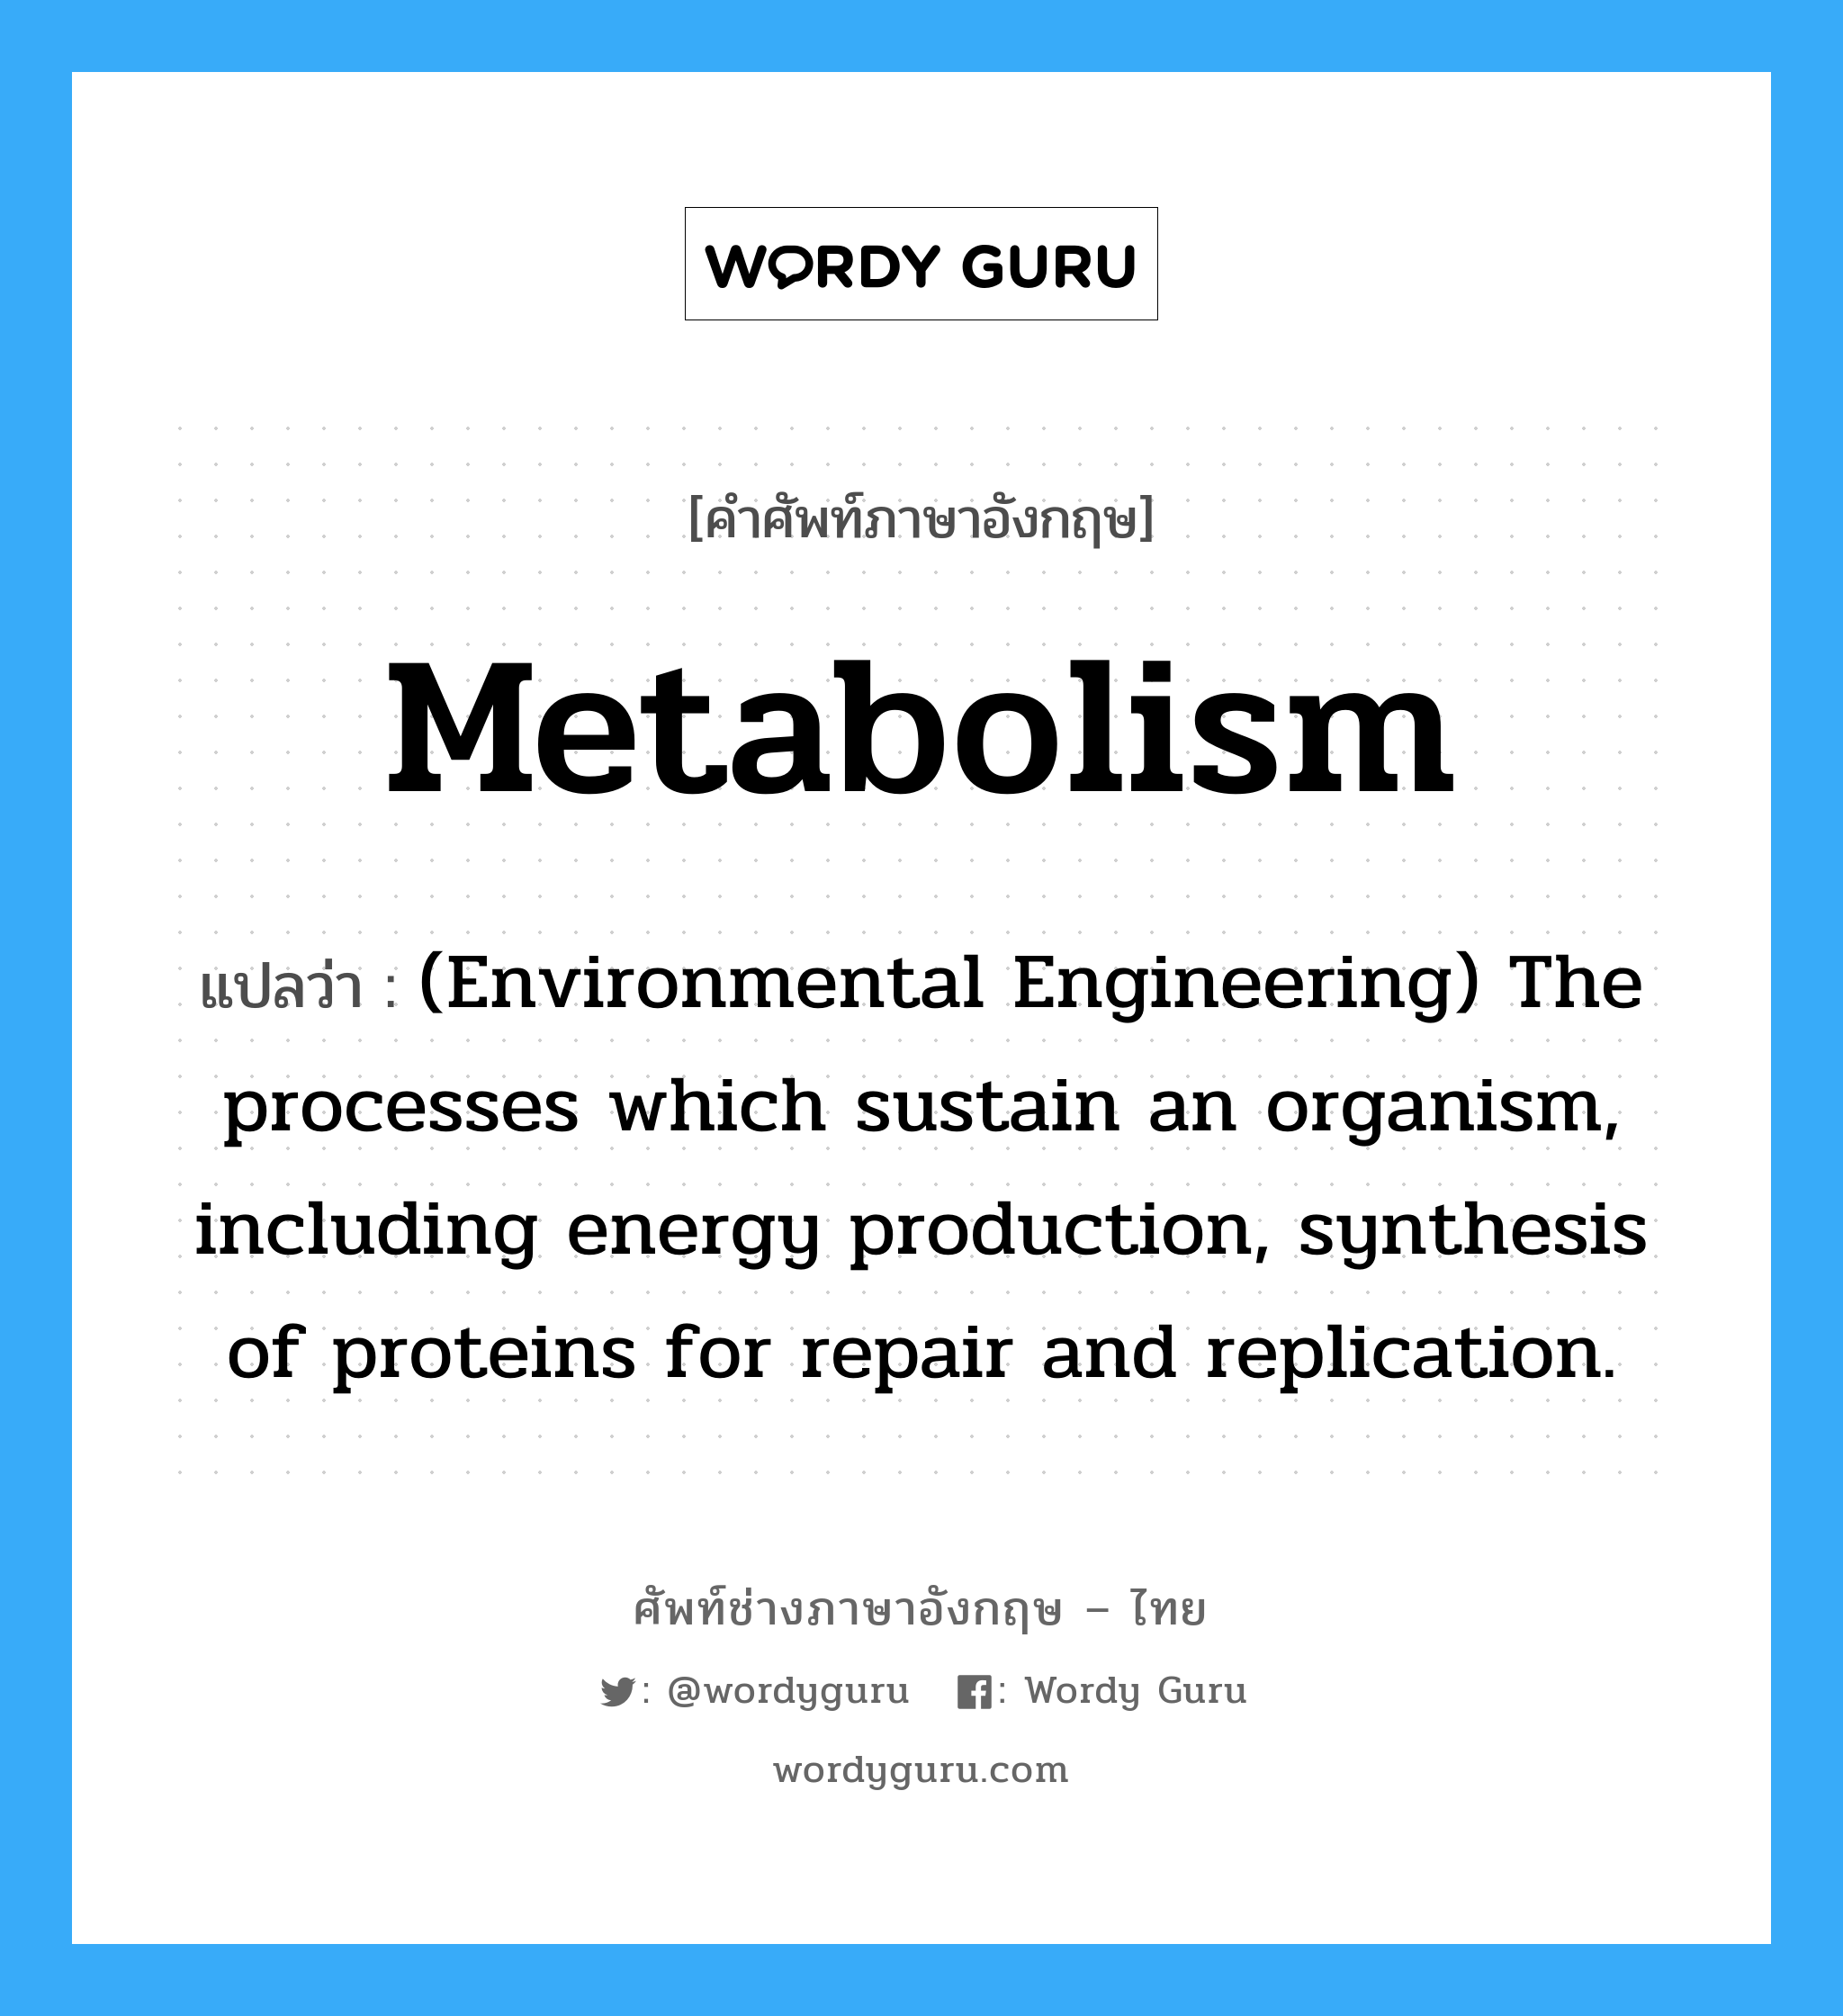 Metabolism แปลว่า?, คำศัพท์ช่างภาษาอังกฤษ - ไทย Metabolism คำศัพท์ภาษาอังกฤษ Metabolism แปลว่า (Environmental Engineering) The processes which sustain an organism, including energy production, synthesis of proteins for repair and replication.